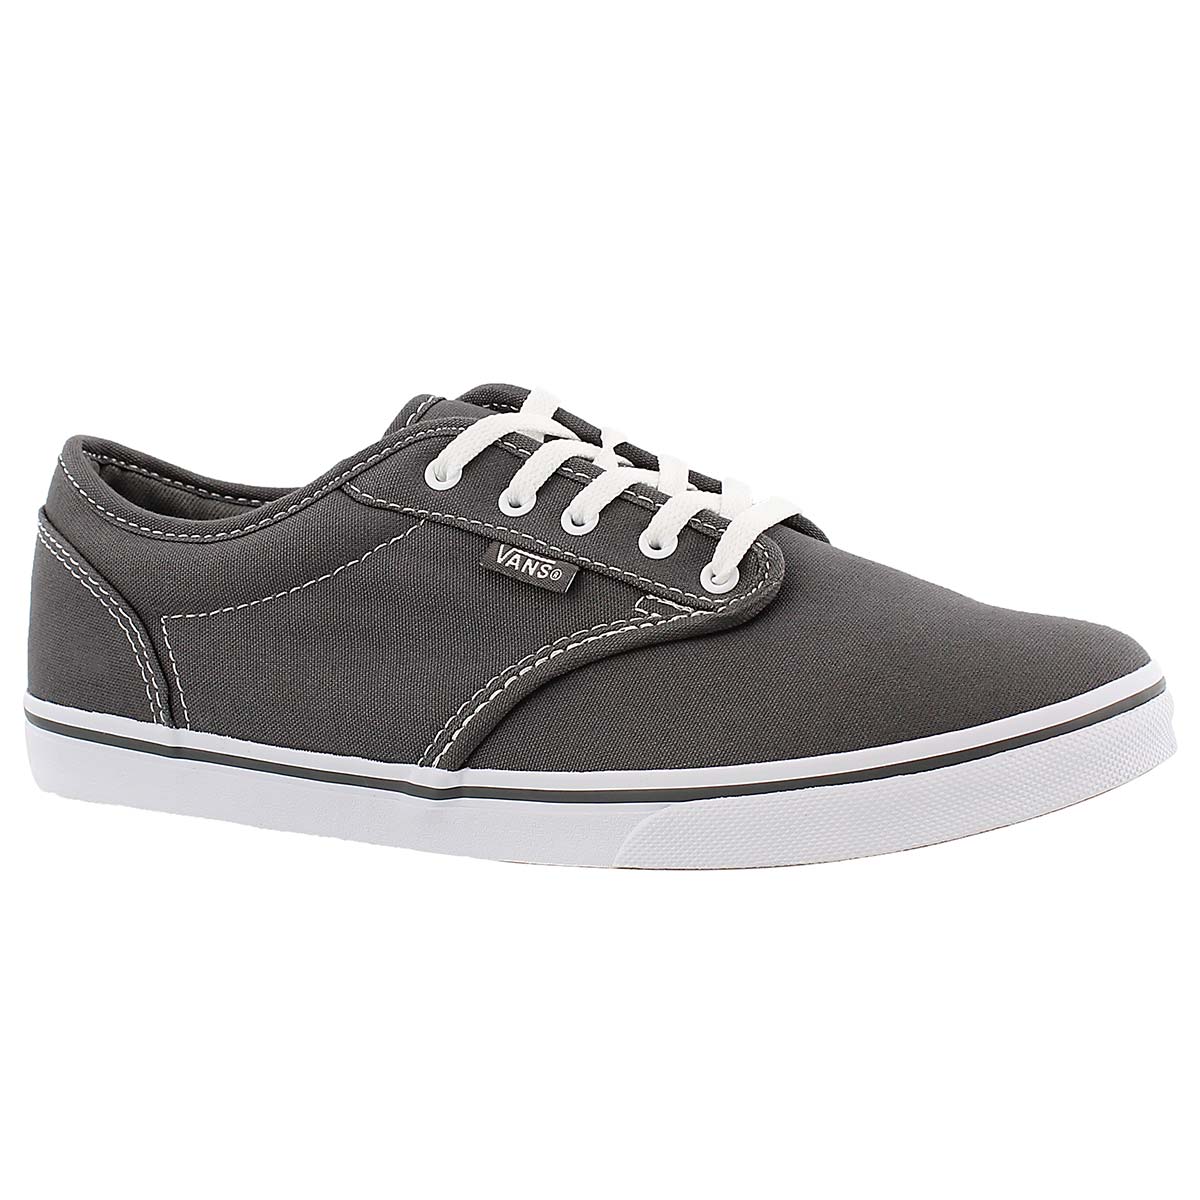 vans atwood low women's skate shoes